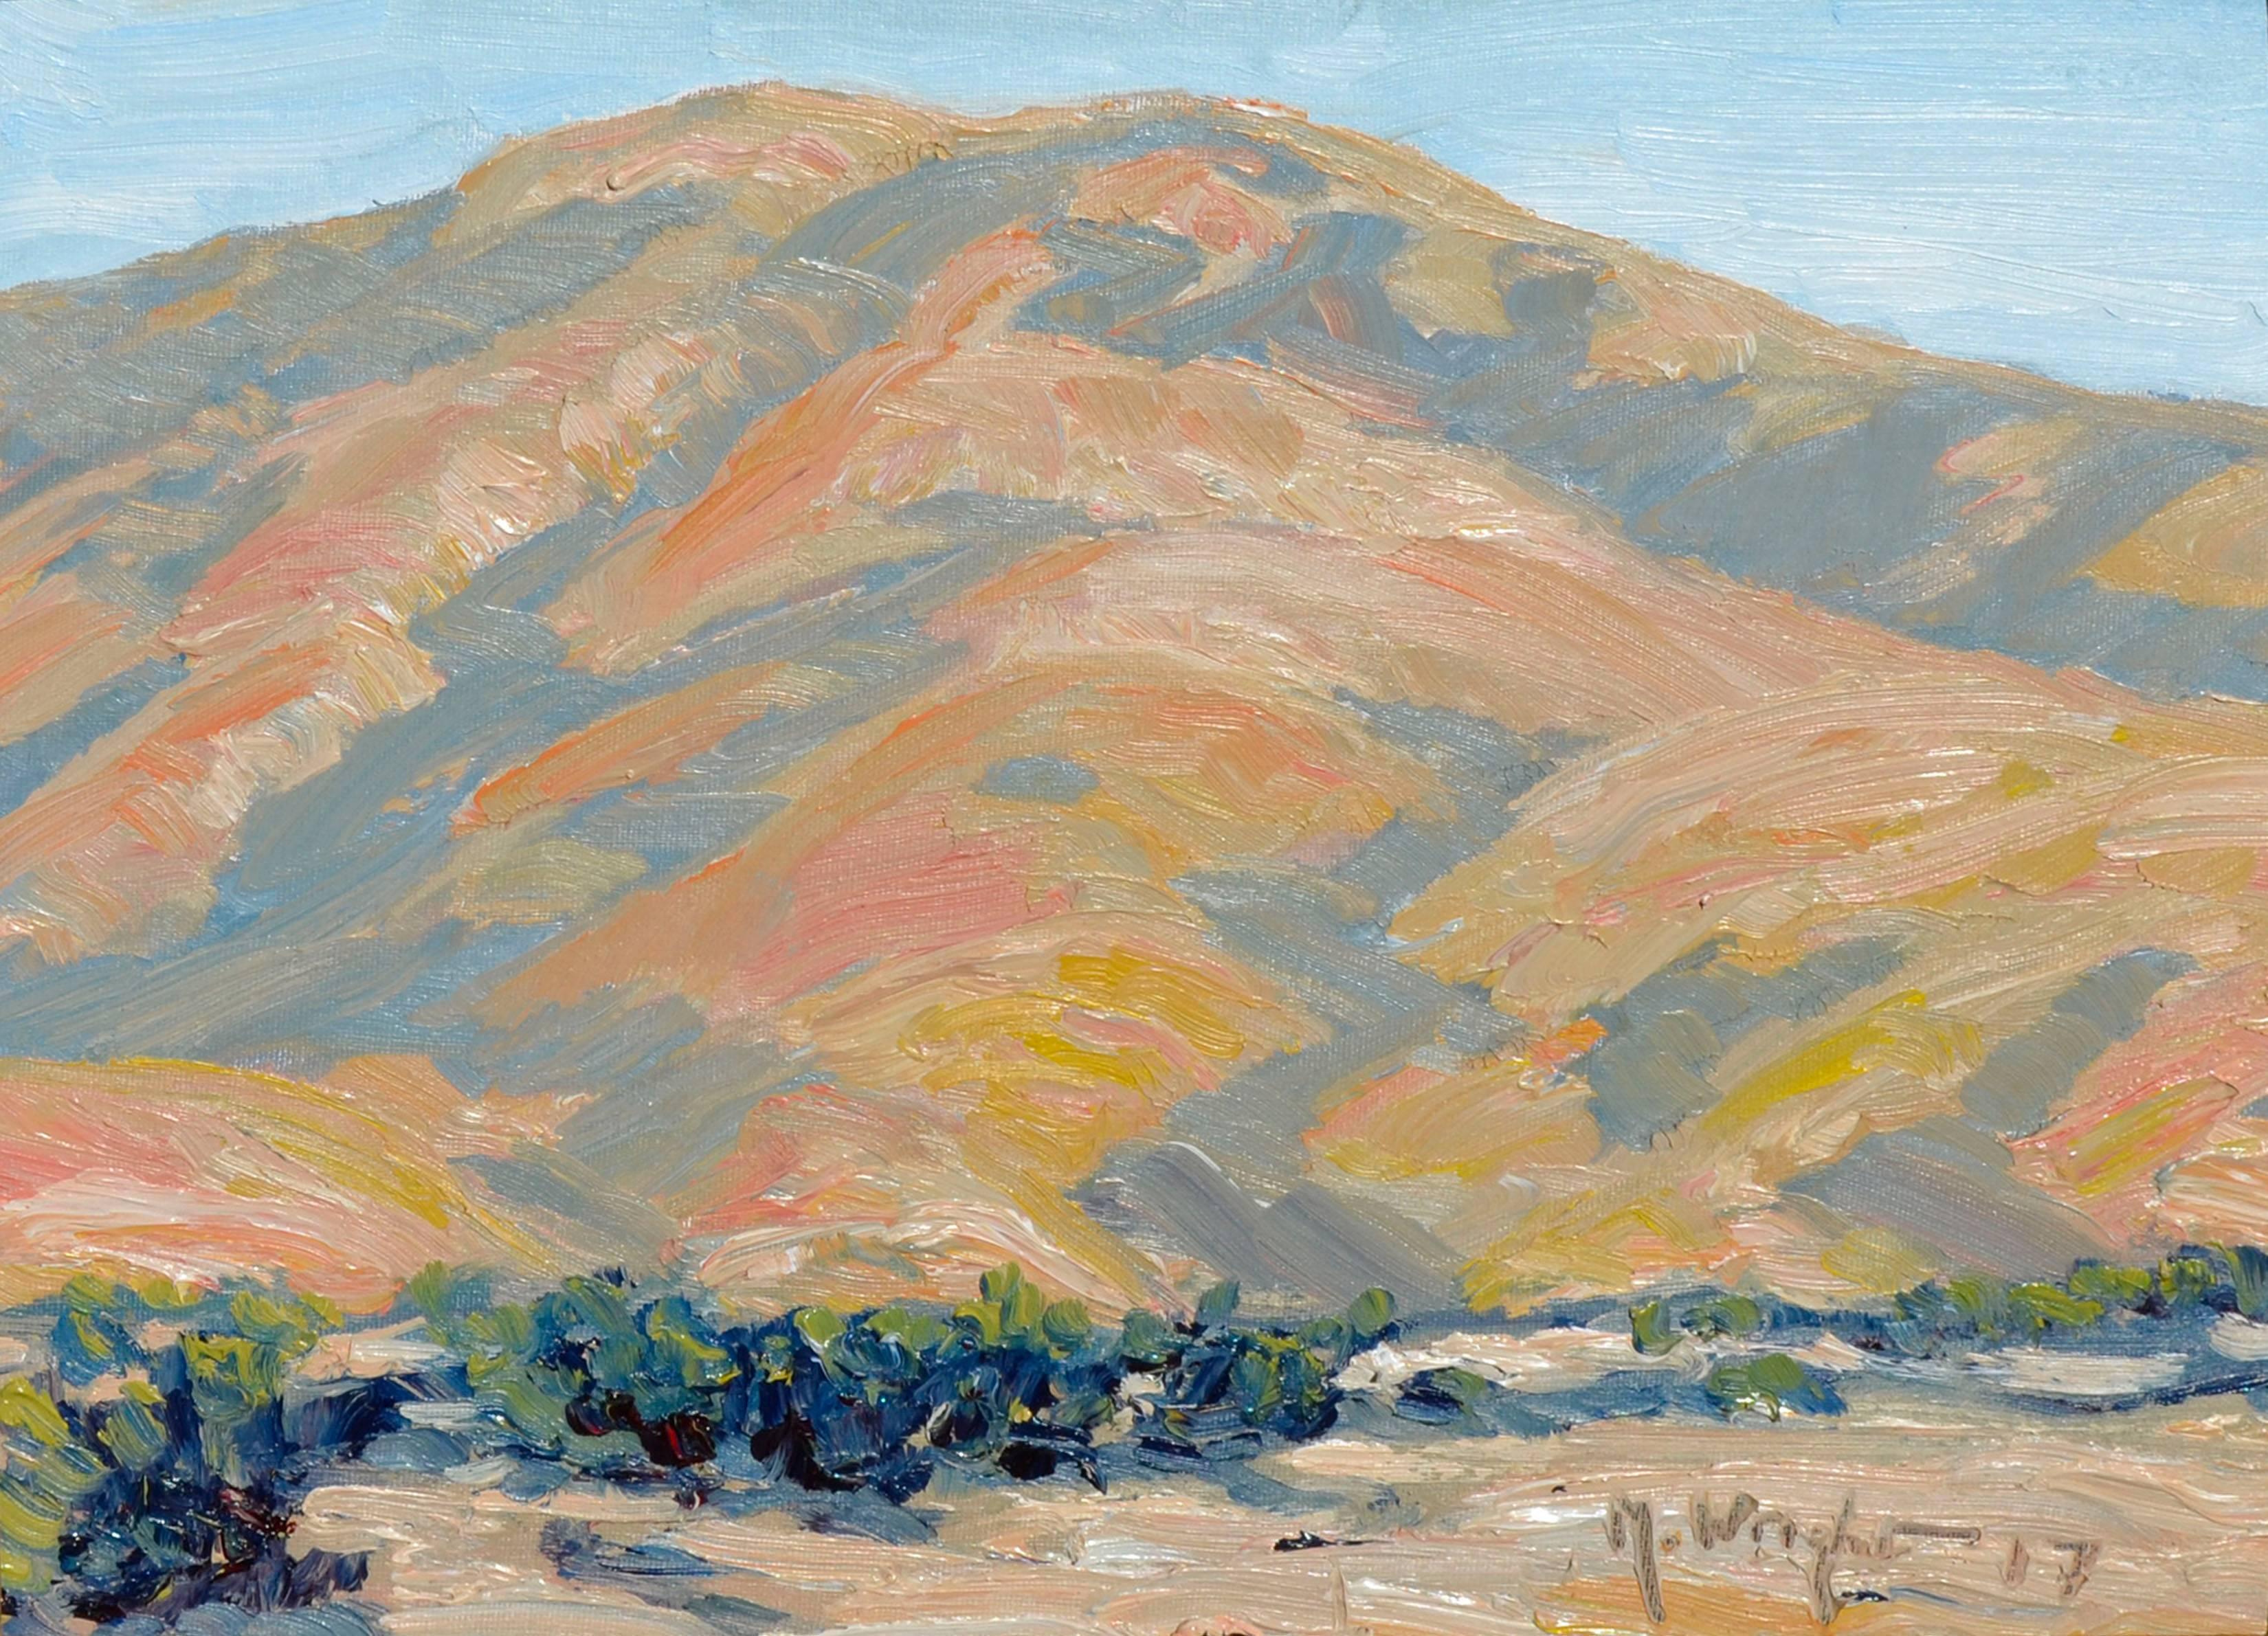 South of San Luis Obispo, California Landscape  - Painting by Mike Wright